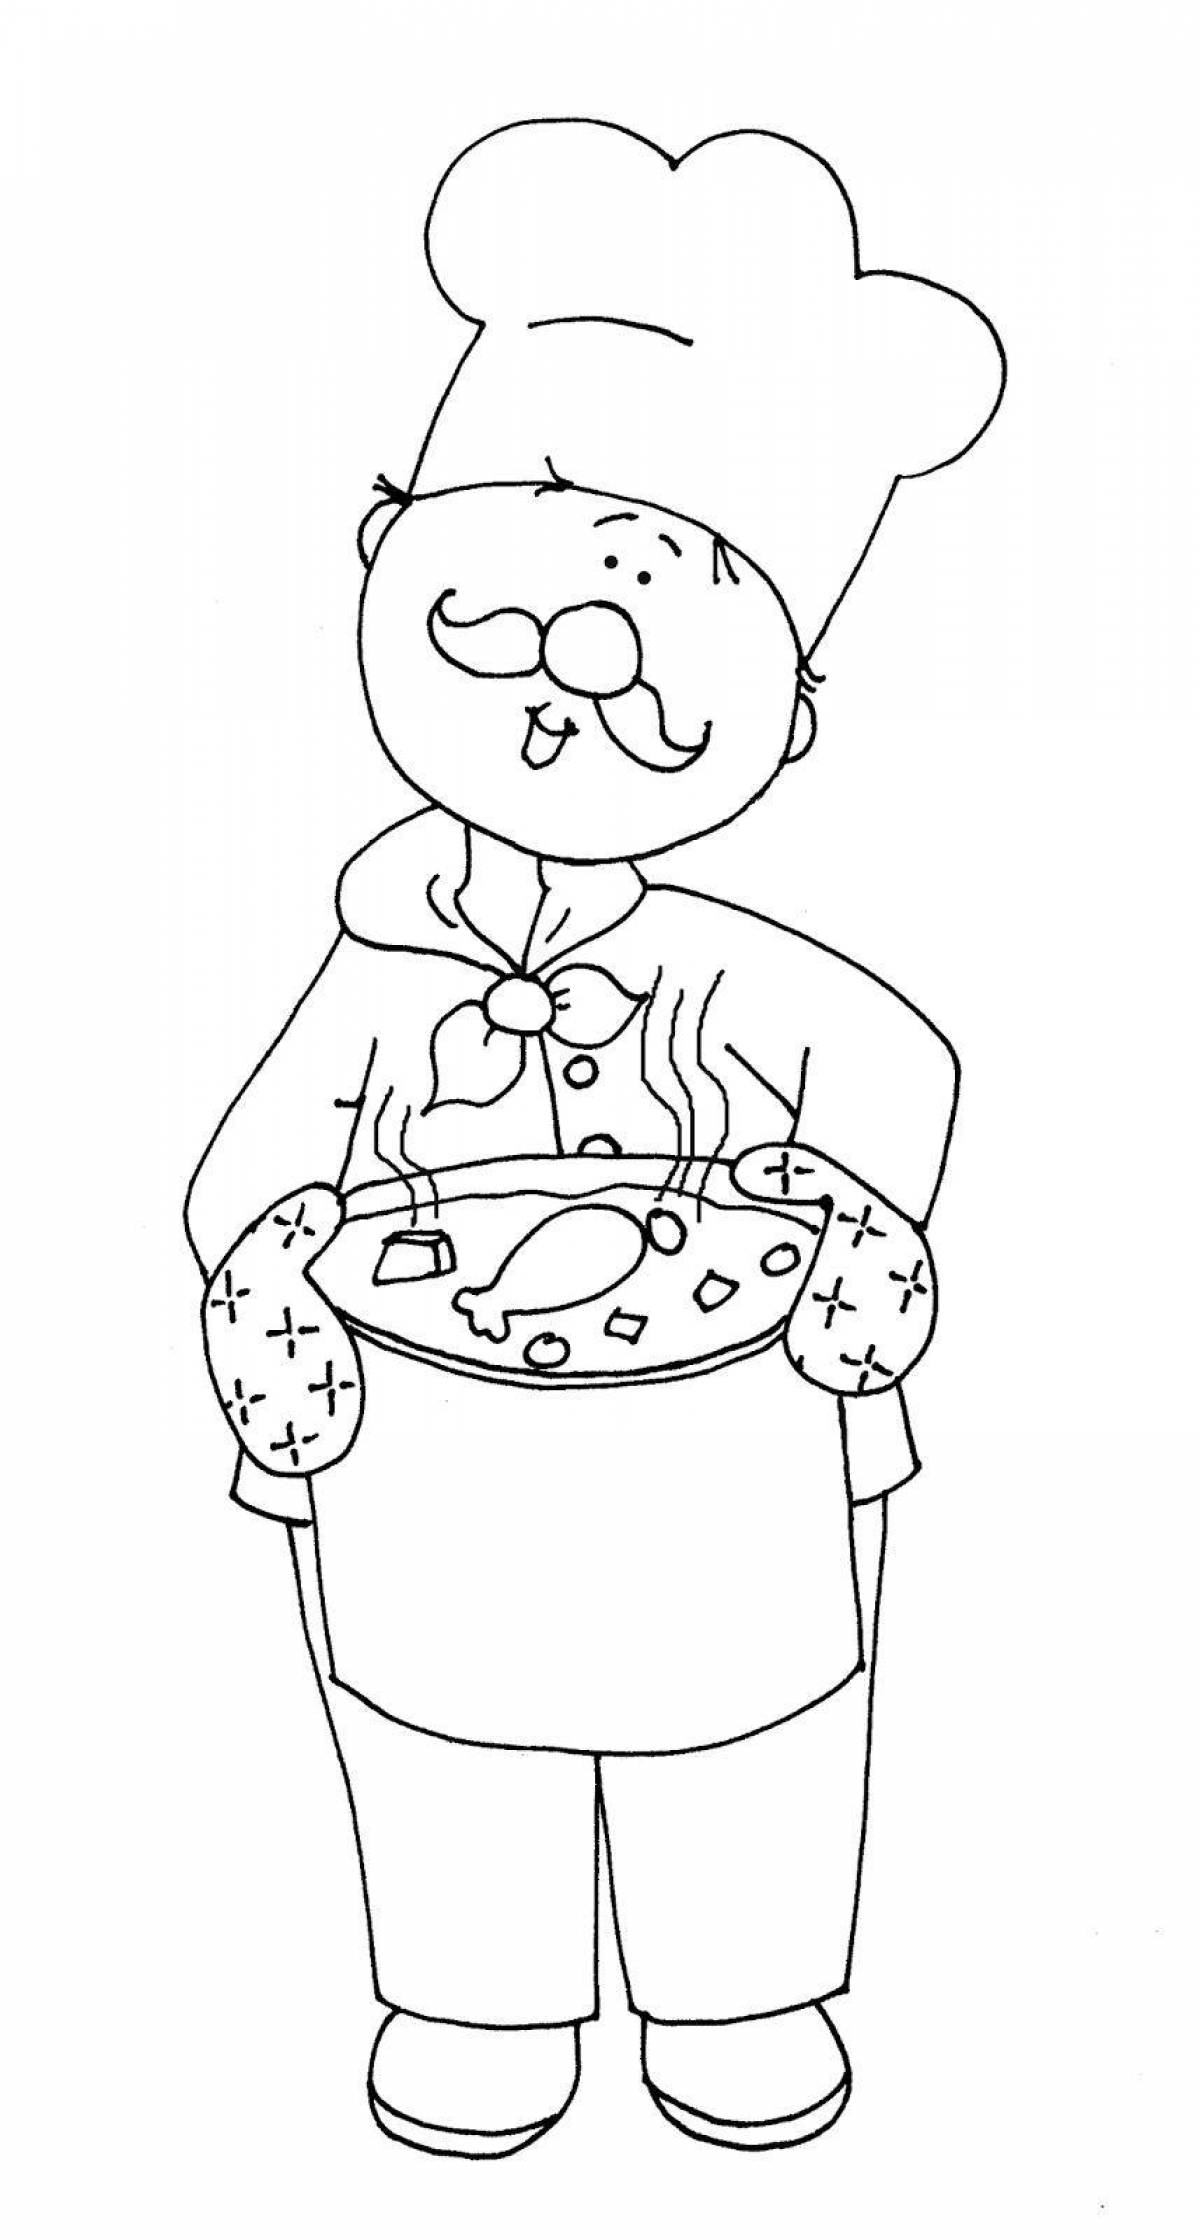 Crazy Cooks Coloring Page for Kindergarten